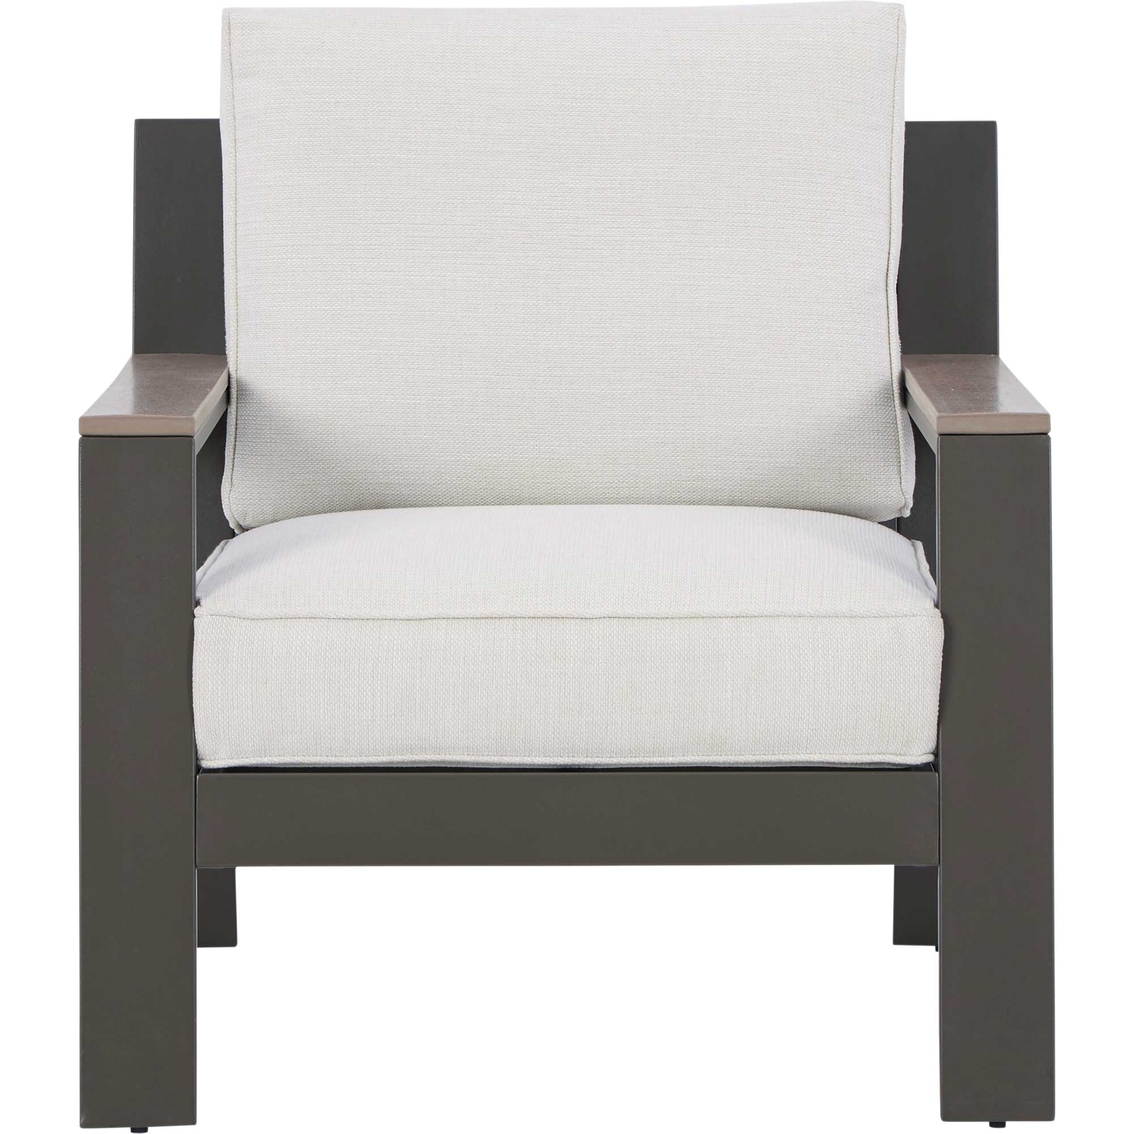 Signature Design by Ashley Tropicava Outdoor Lounge Chair with Cushion - Image 2 of 6